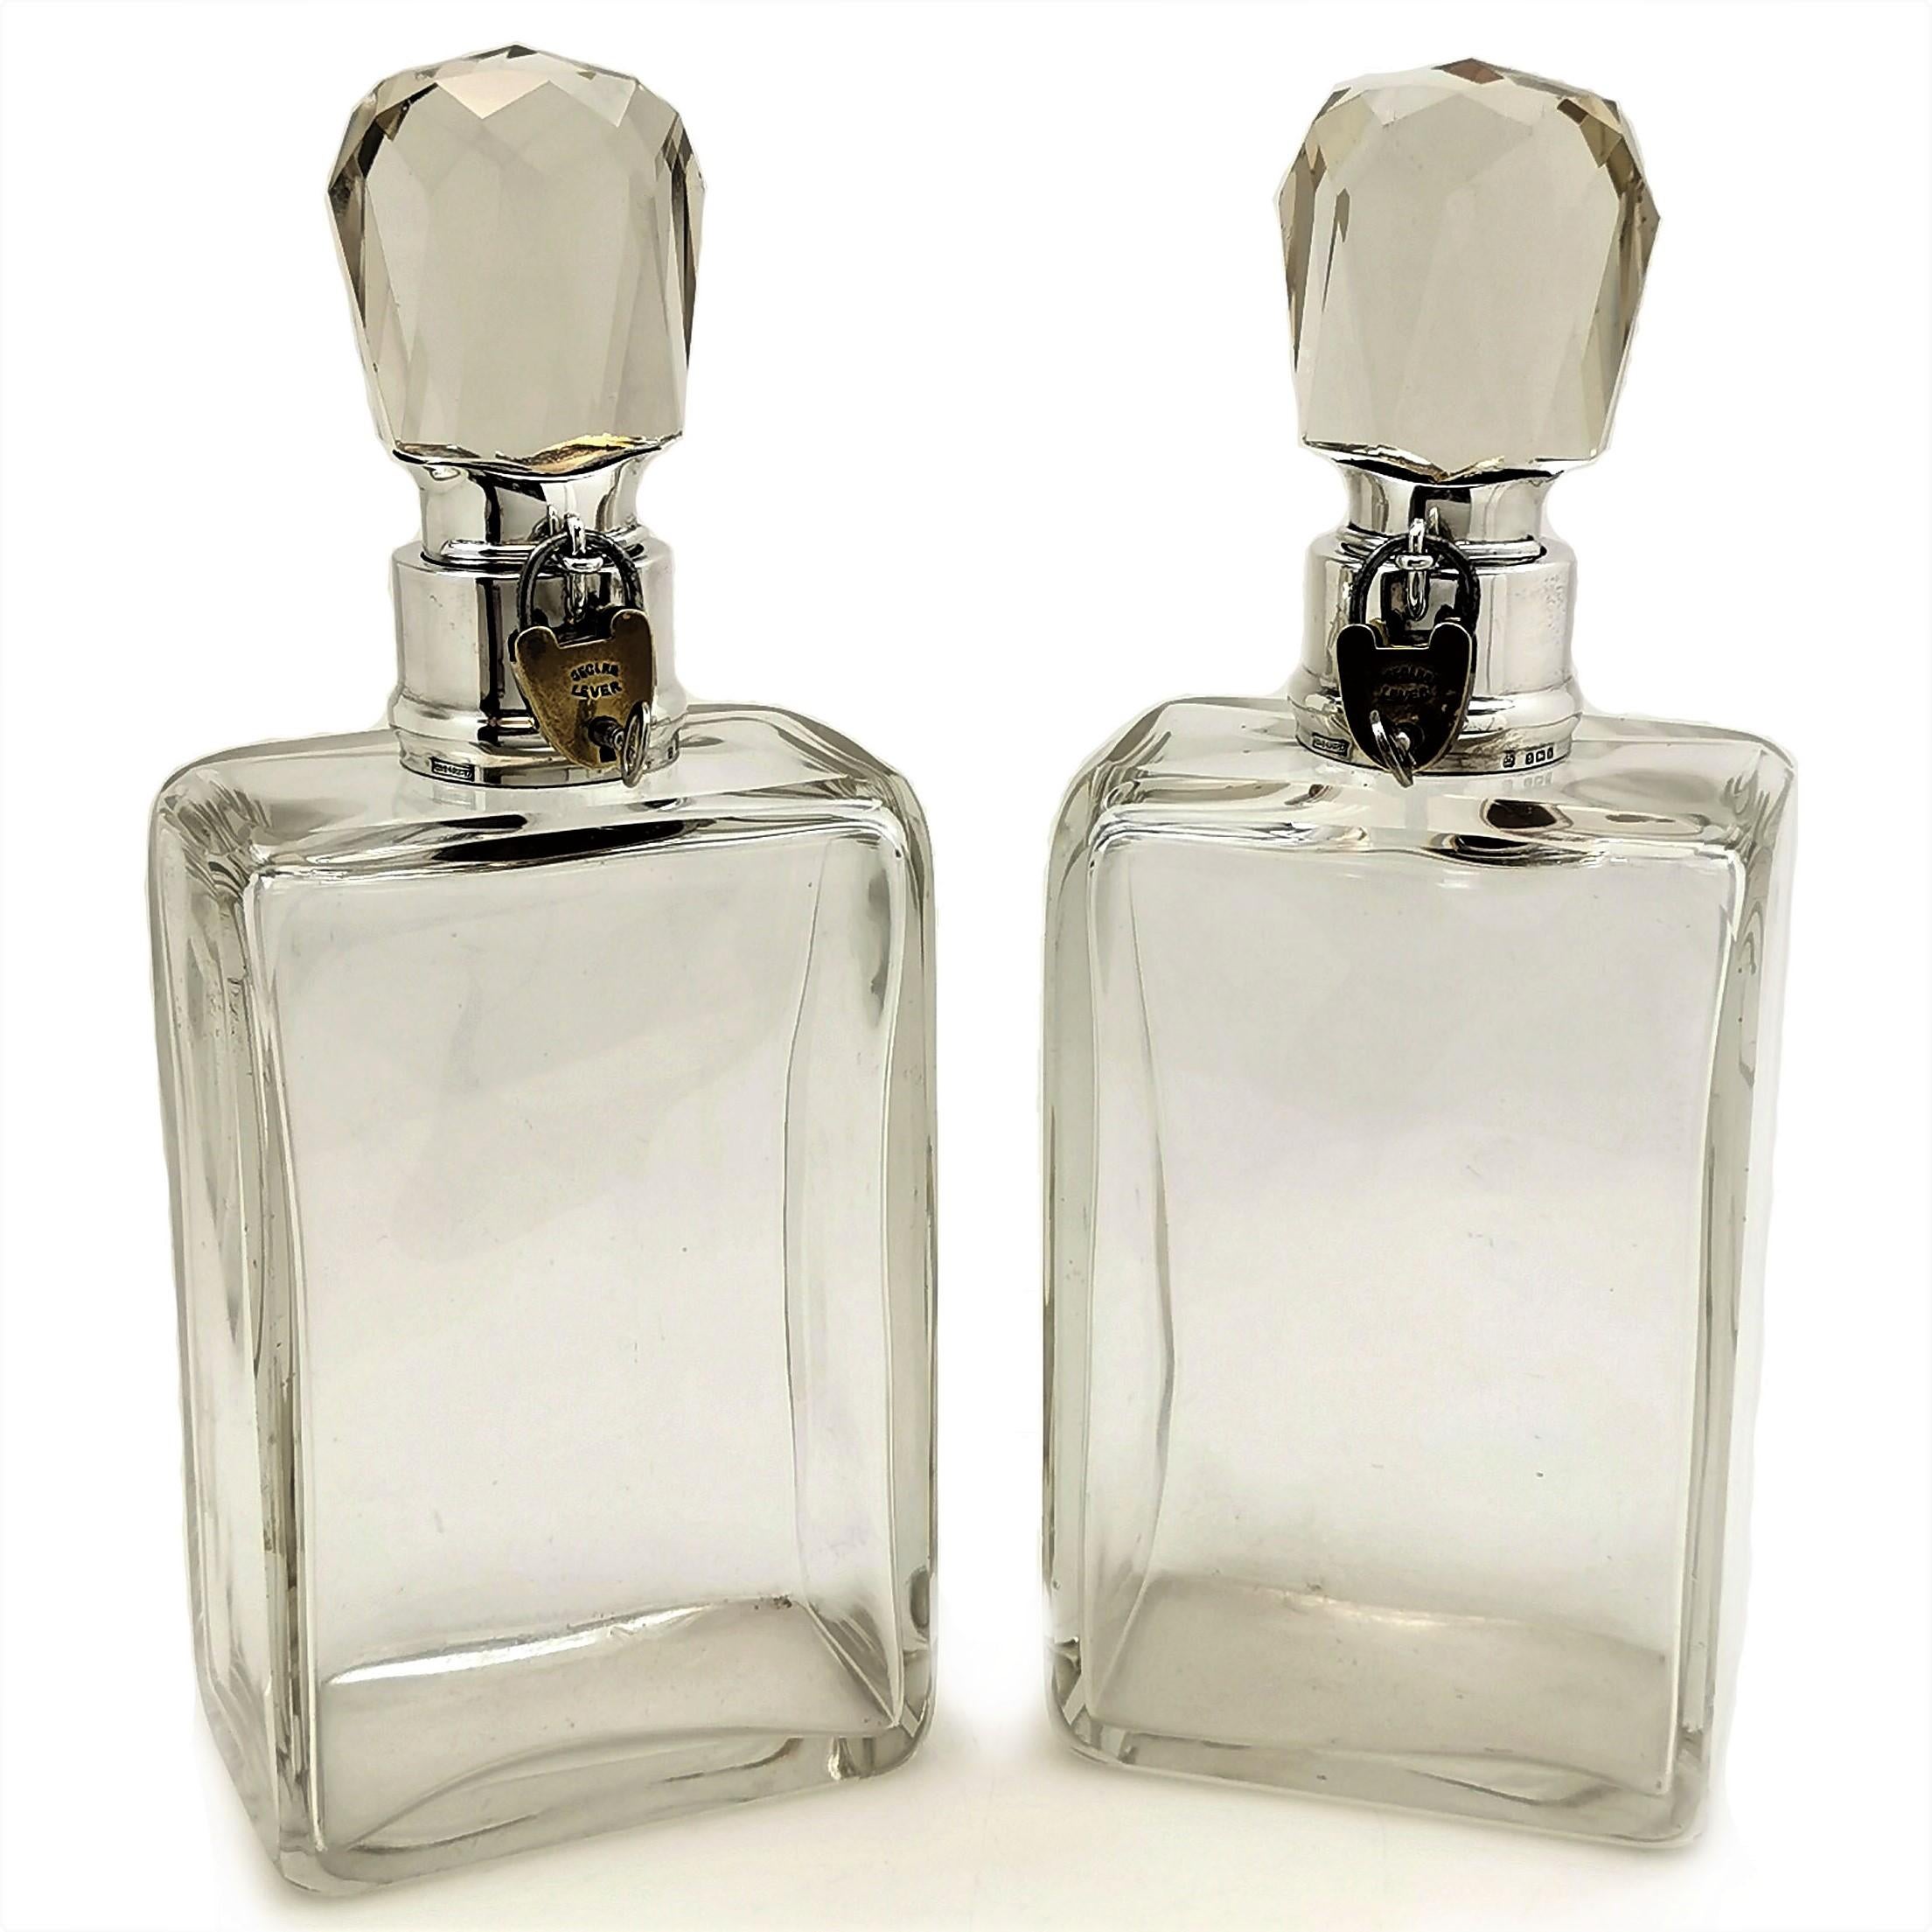 A pair of impressive Antique sterling Silver and Glass Decanters. The Decanters have rectangular clear glass bodies and faceted clear glass stoppers. The necks of the Decanters and the stoppers have fitted silver collars that interlocking clasps